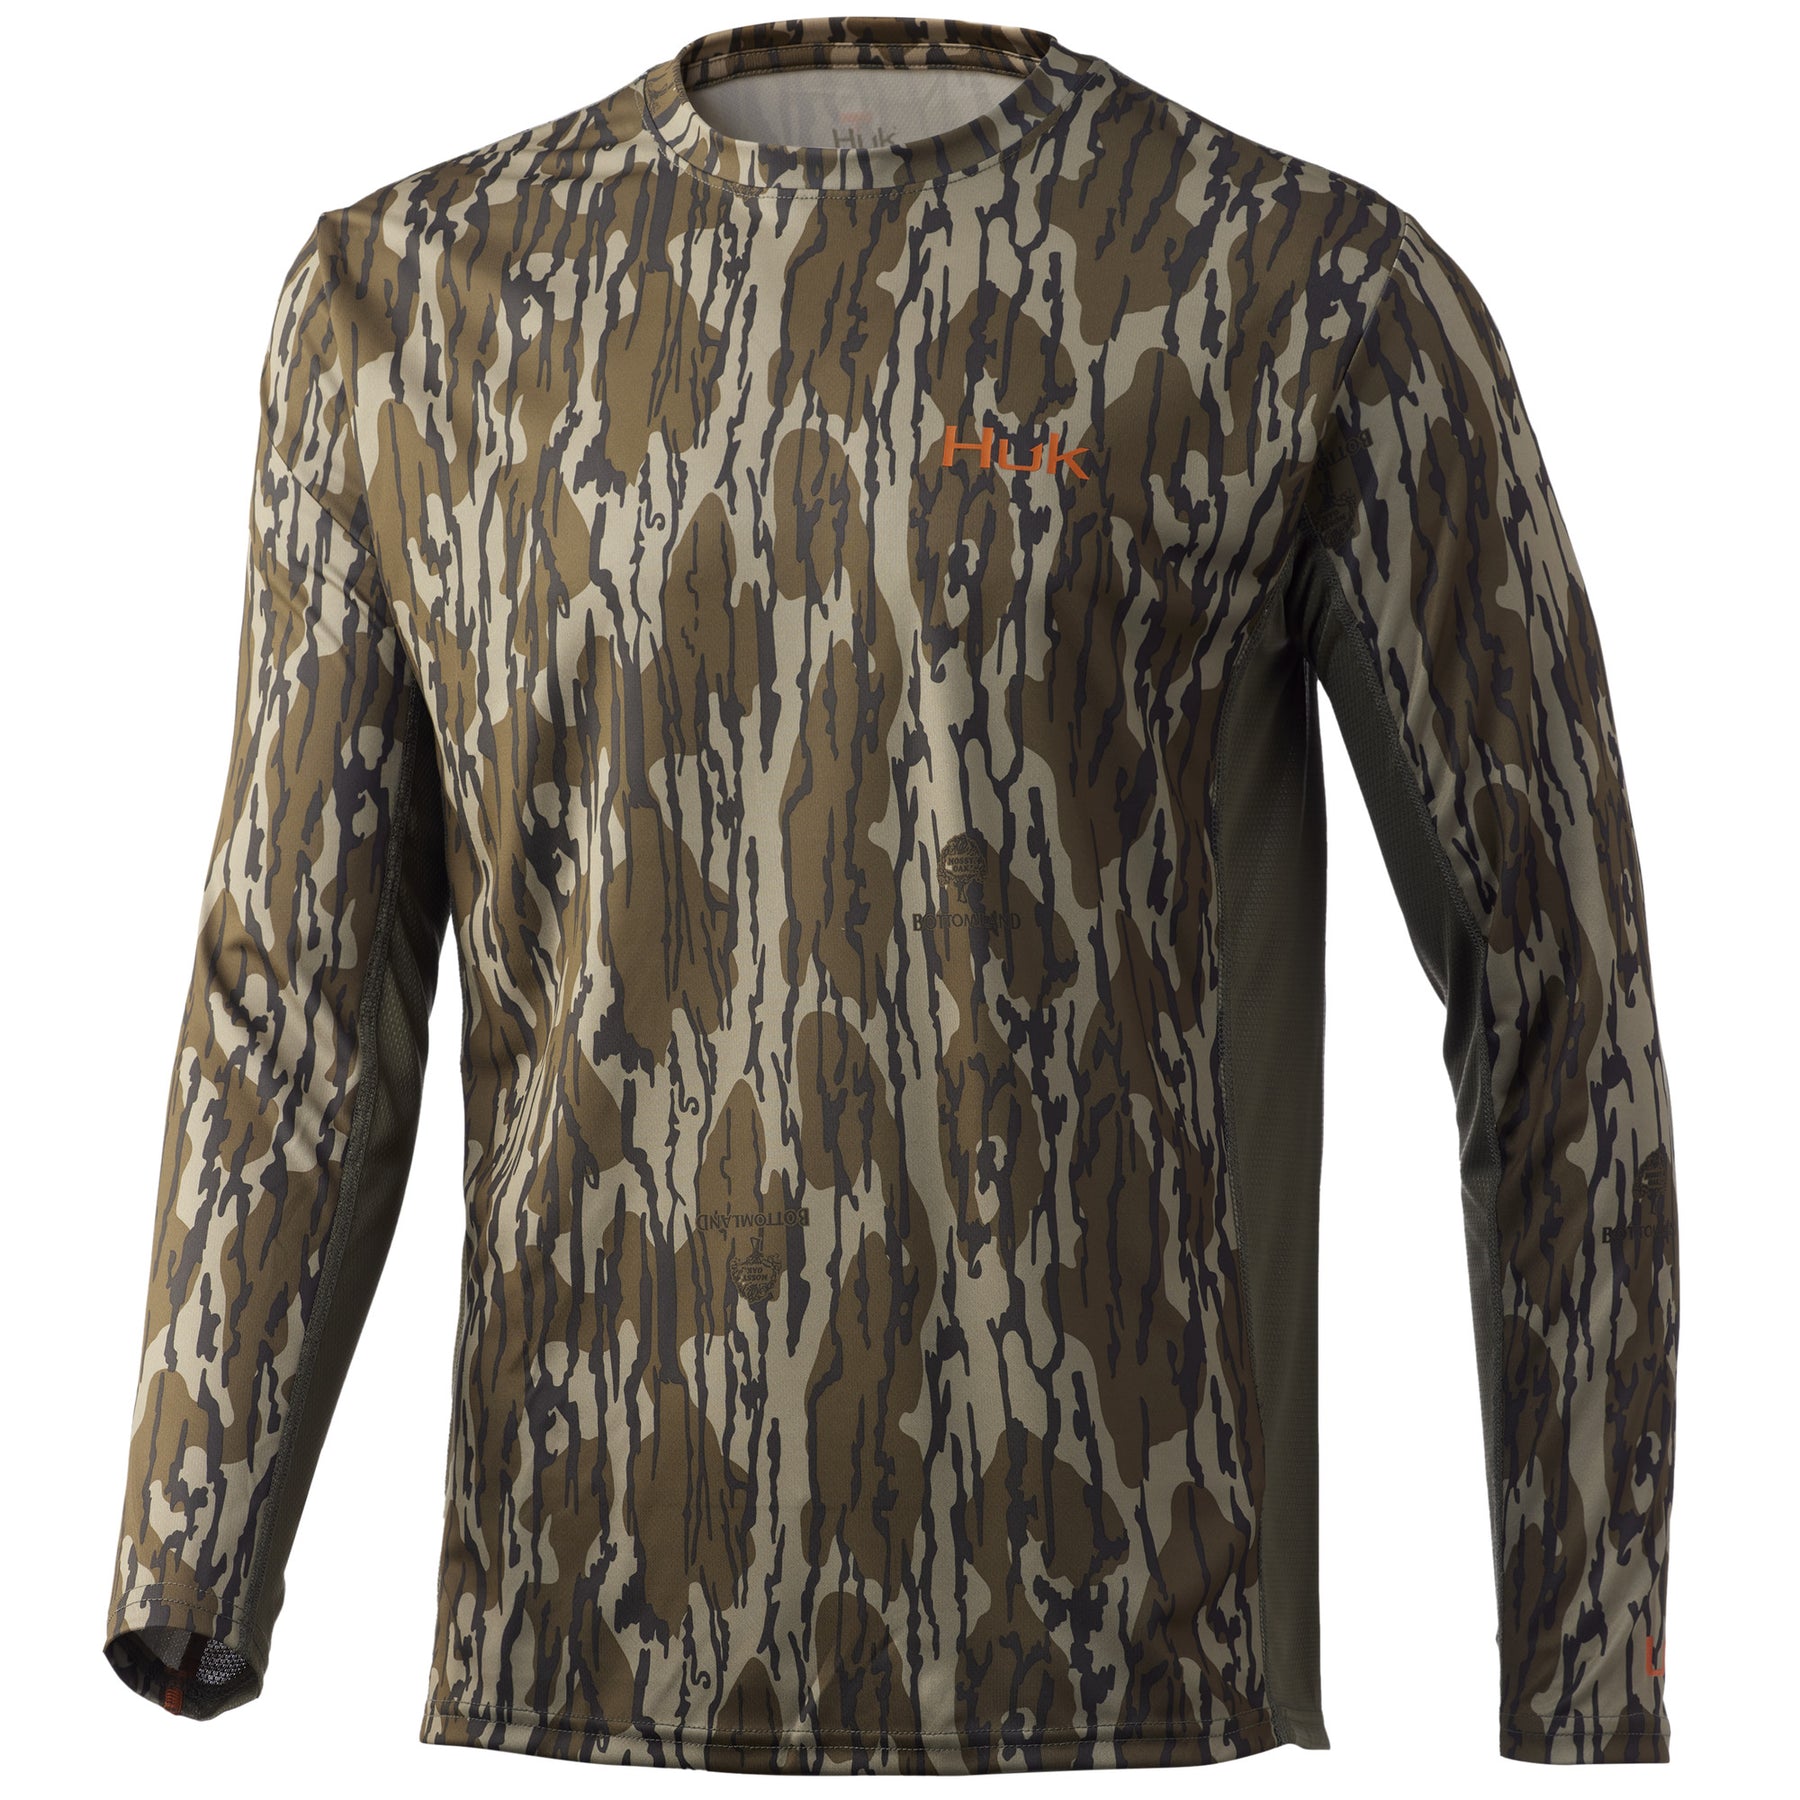 Men's Huk Mossy Oak Pursuit Performance Long Sleeve T - While it may seem  crazy to think about donning a jacket in this weather - Shirt